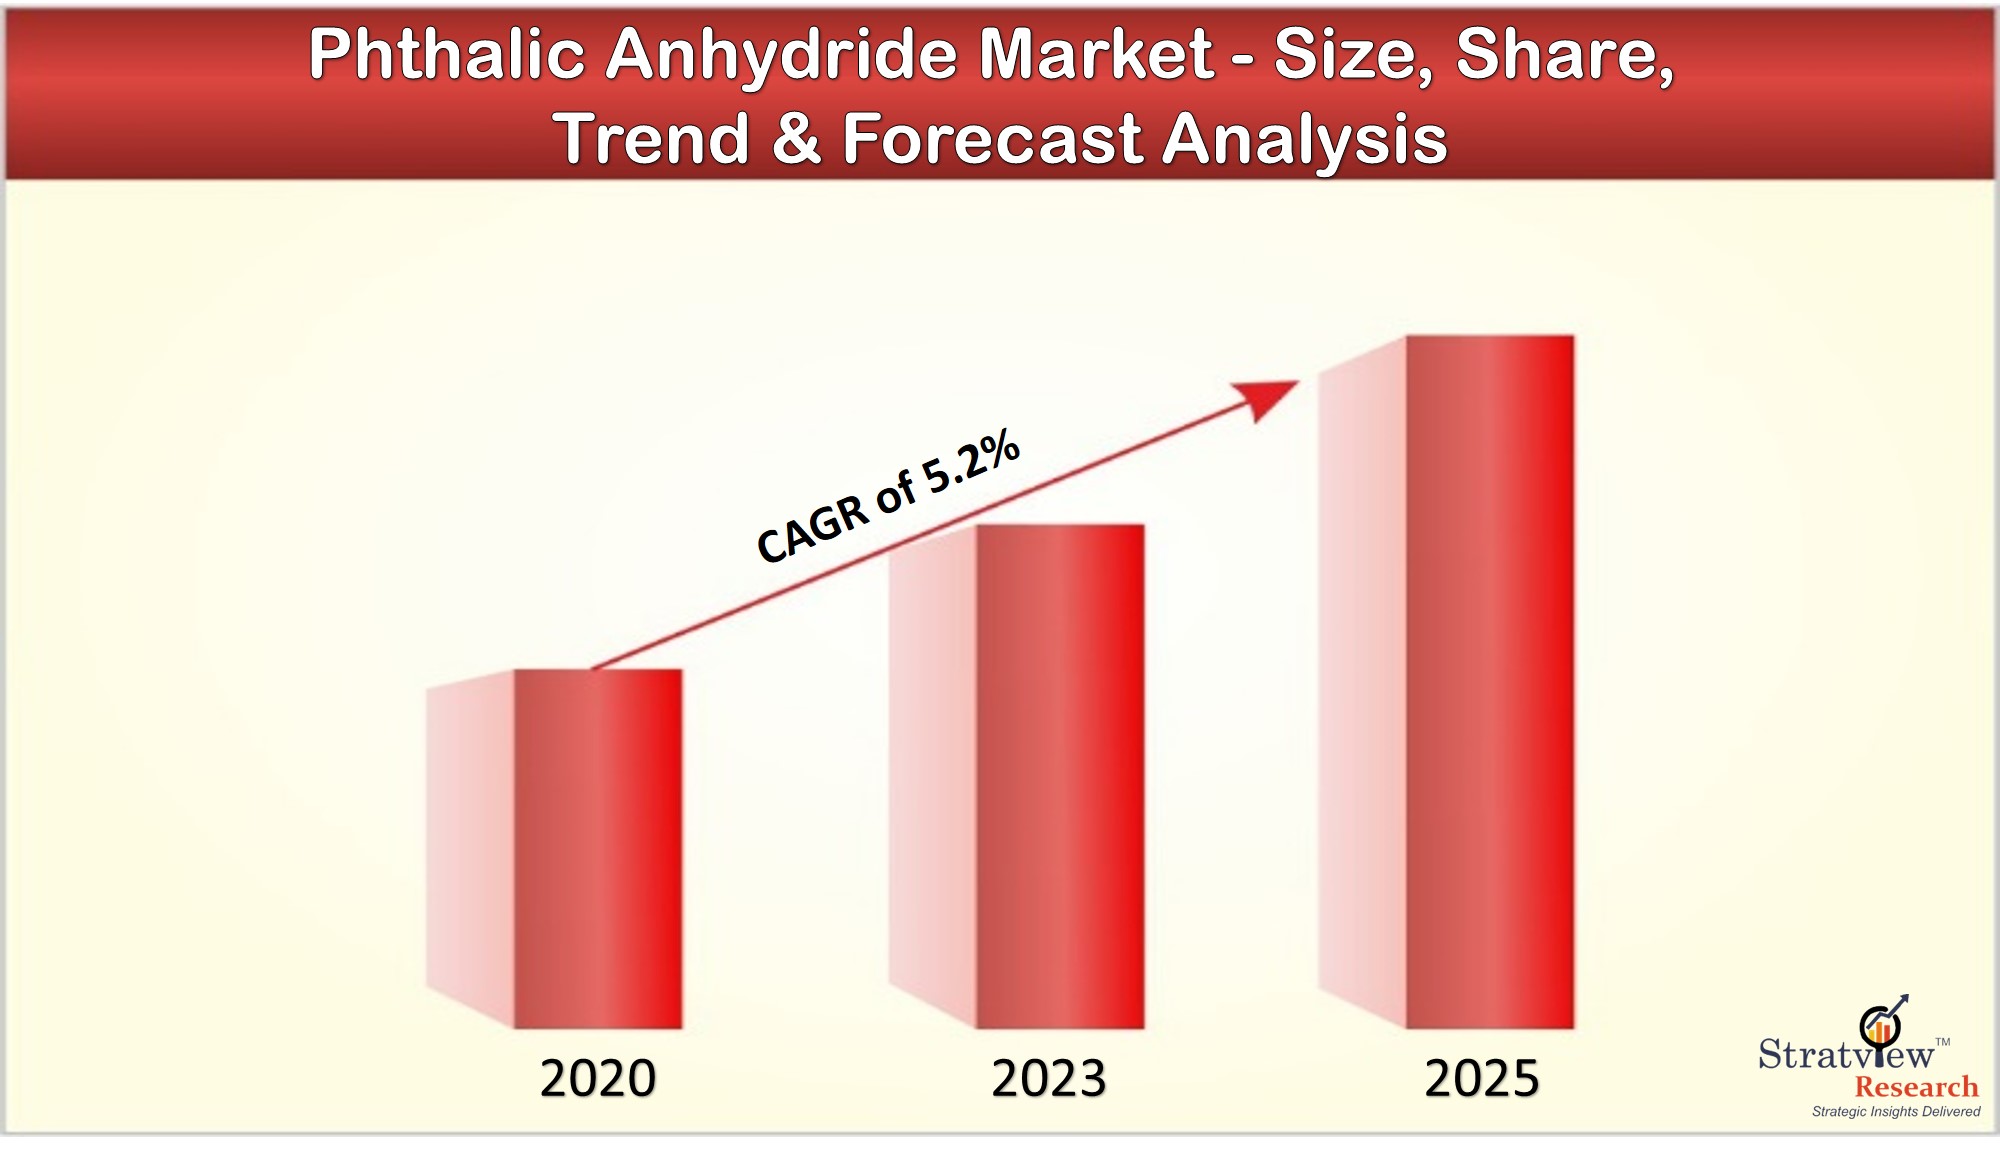 What is the future of Phthalic Anhydride Market? Know Covid Impact on Size, Share & Forecasts